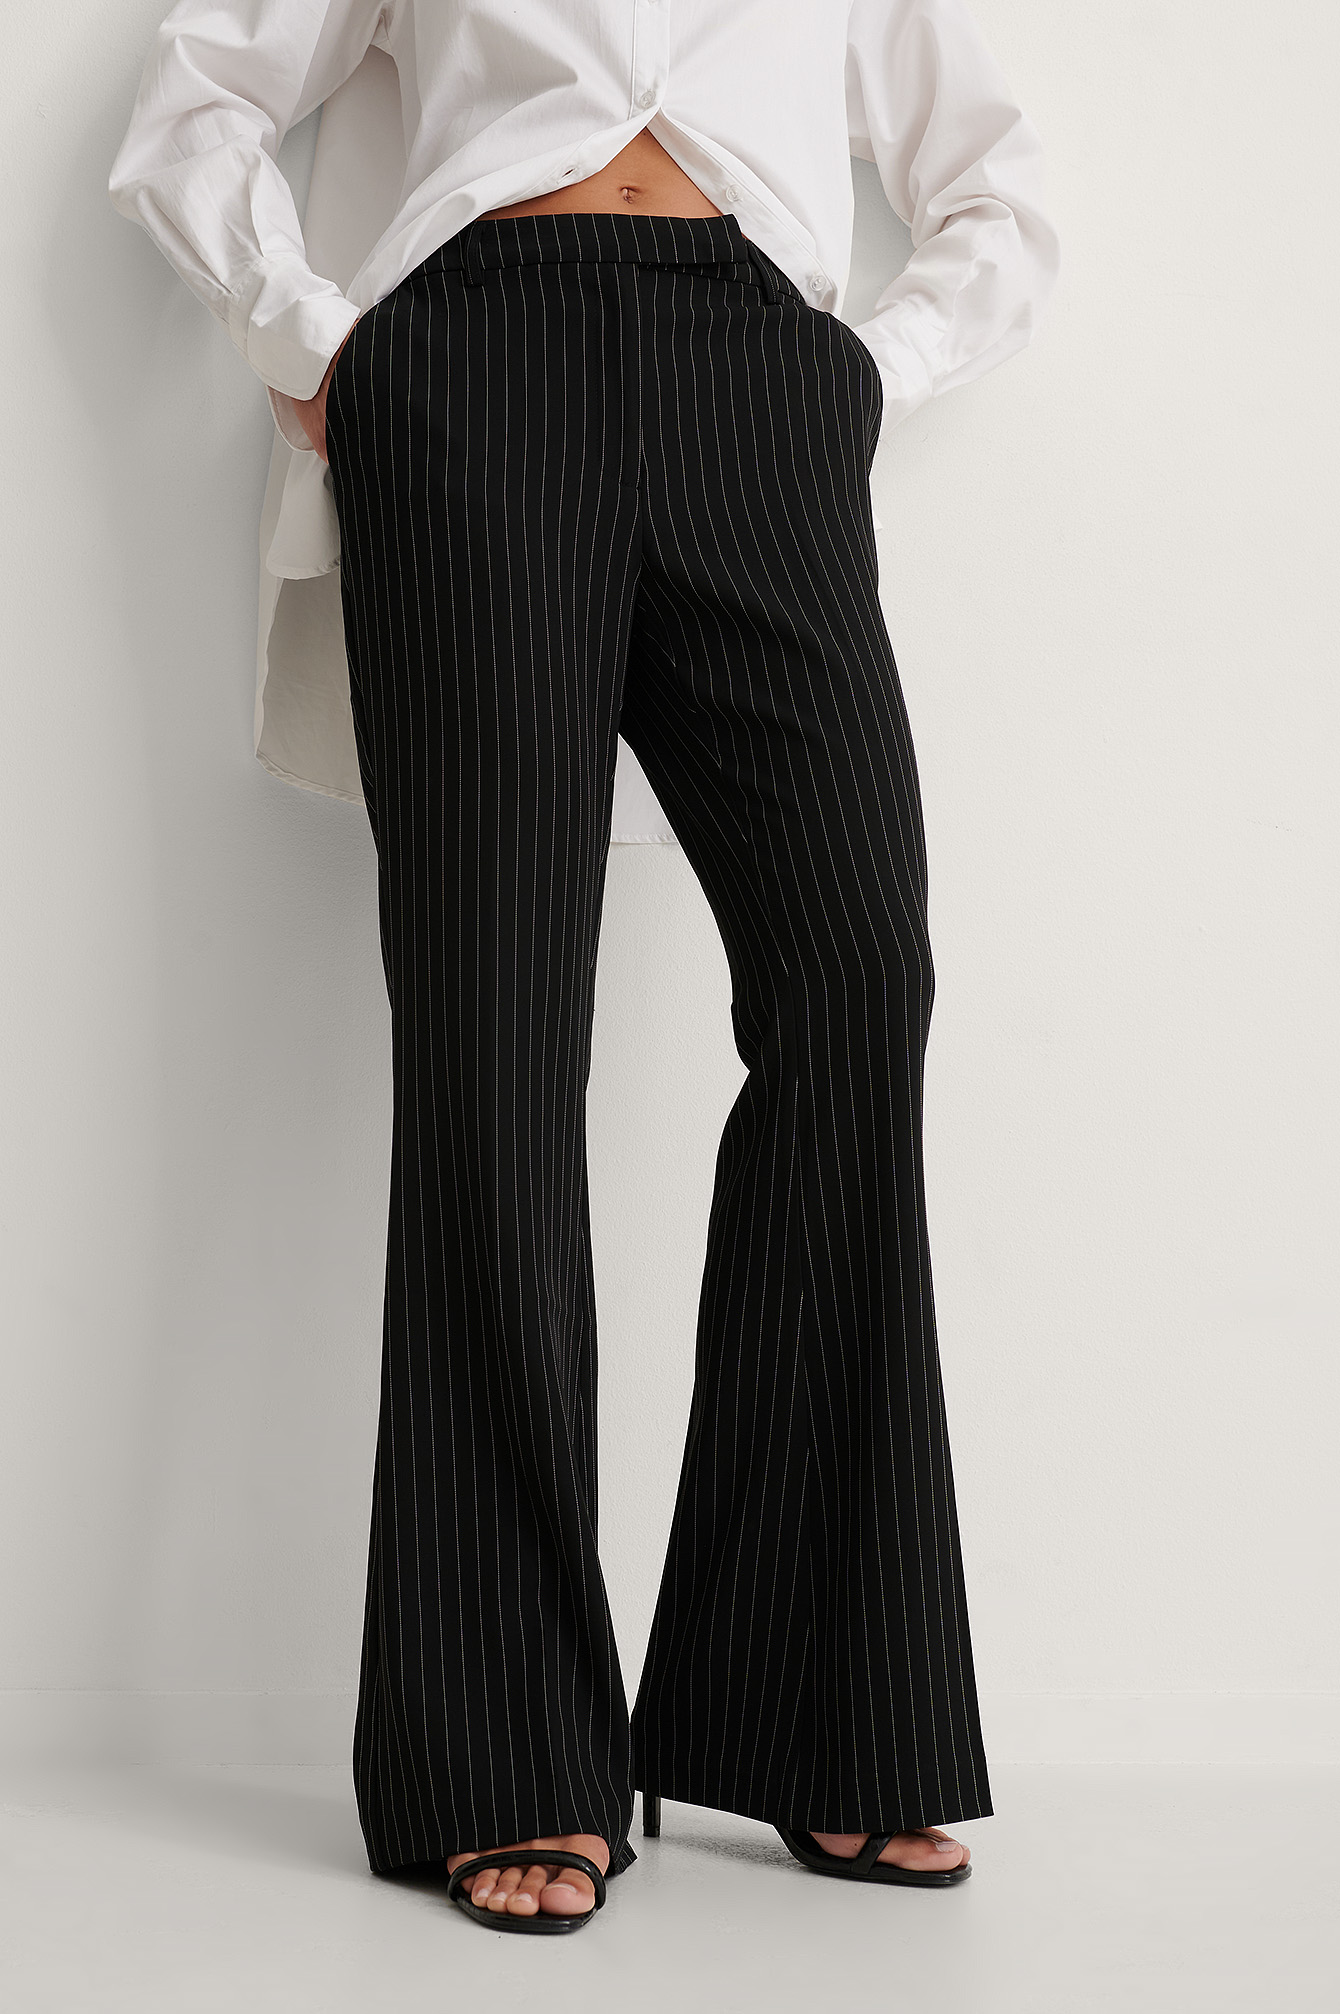  Other Stories coord pinstripe flare trouser in navy blue  ASOS